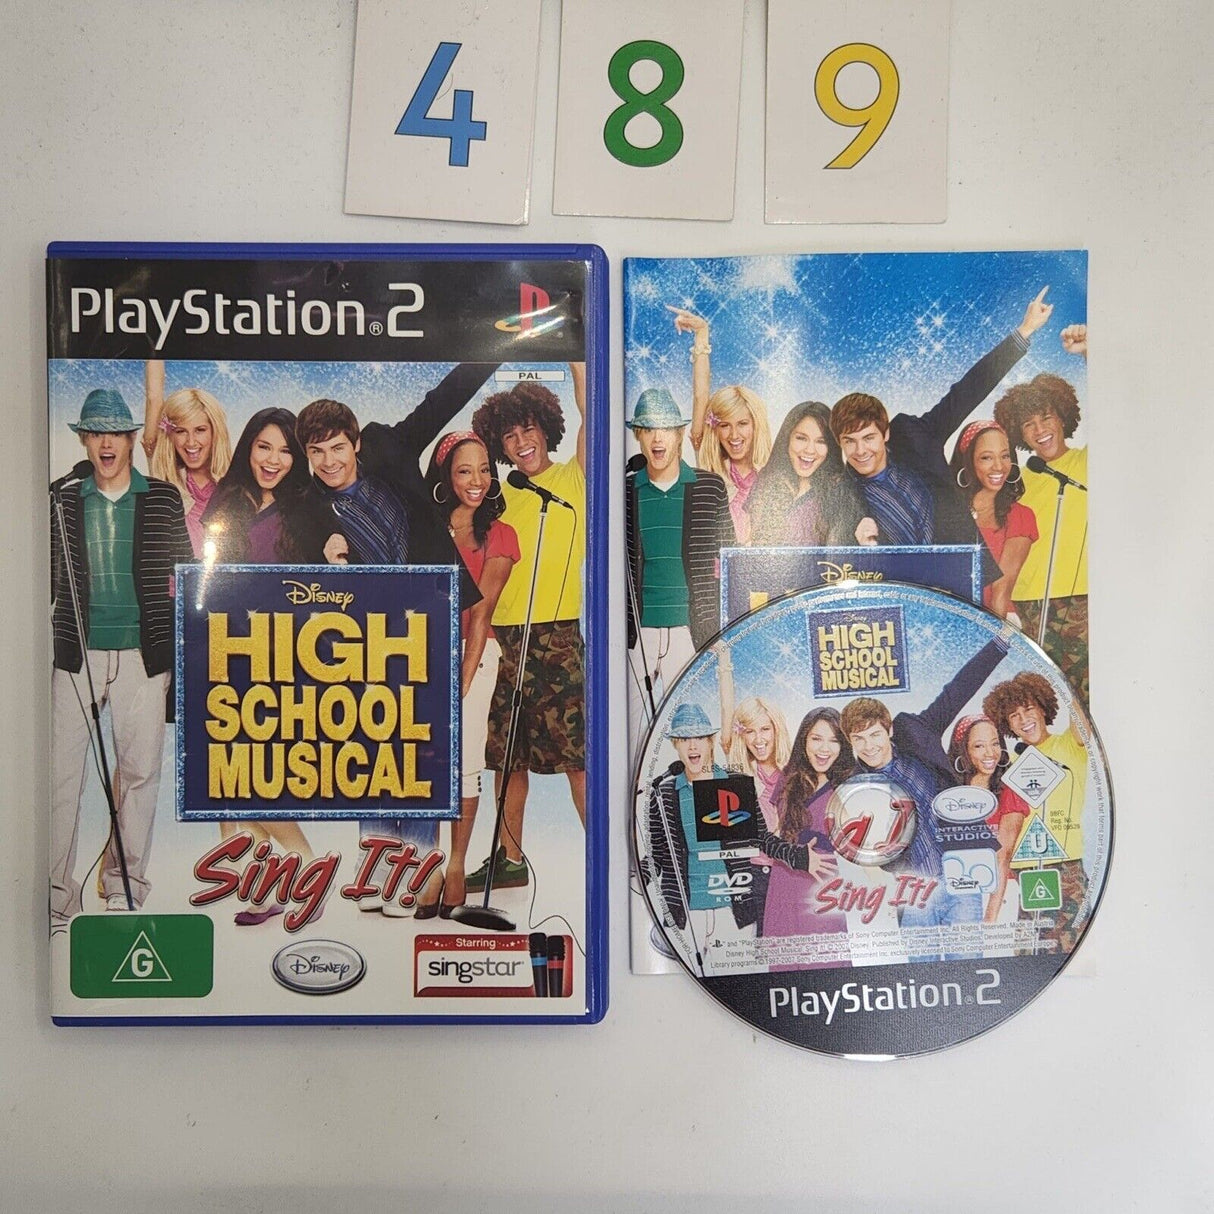 High School Musical Sing It PS2 Playstation 2 Game + Manual PAL